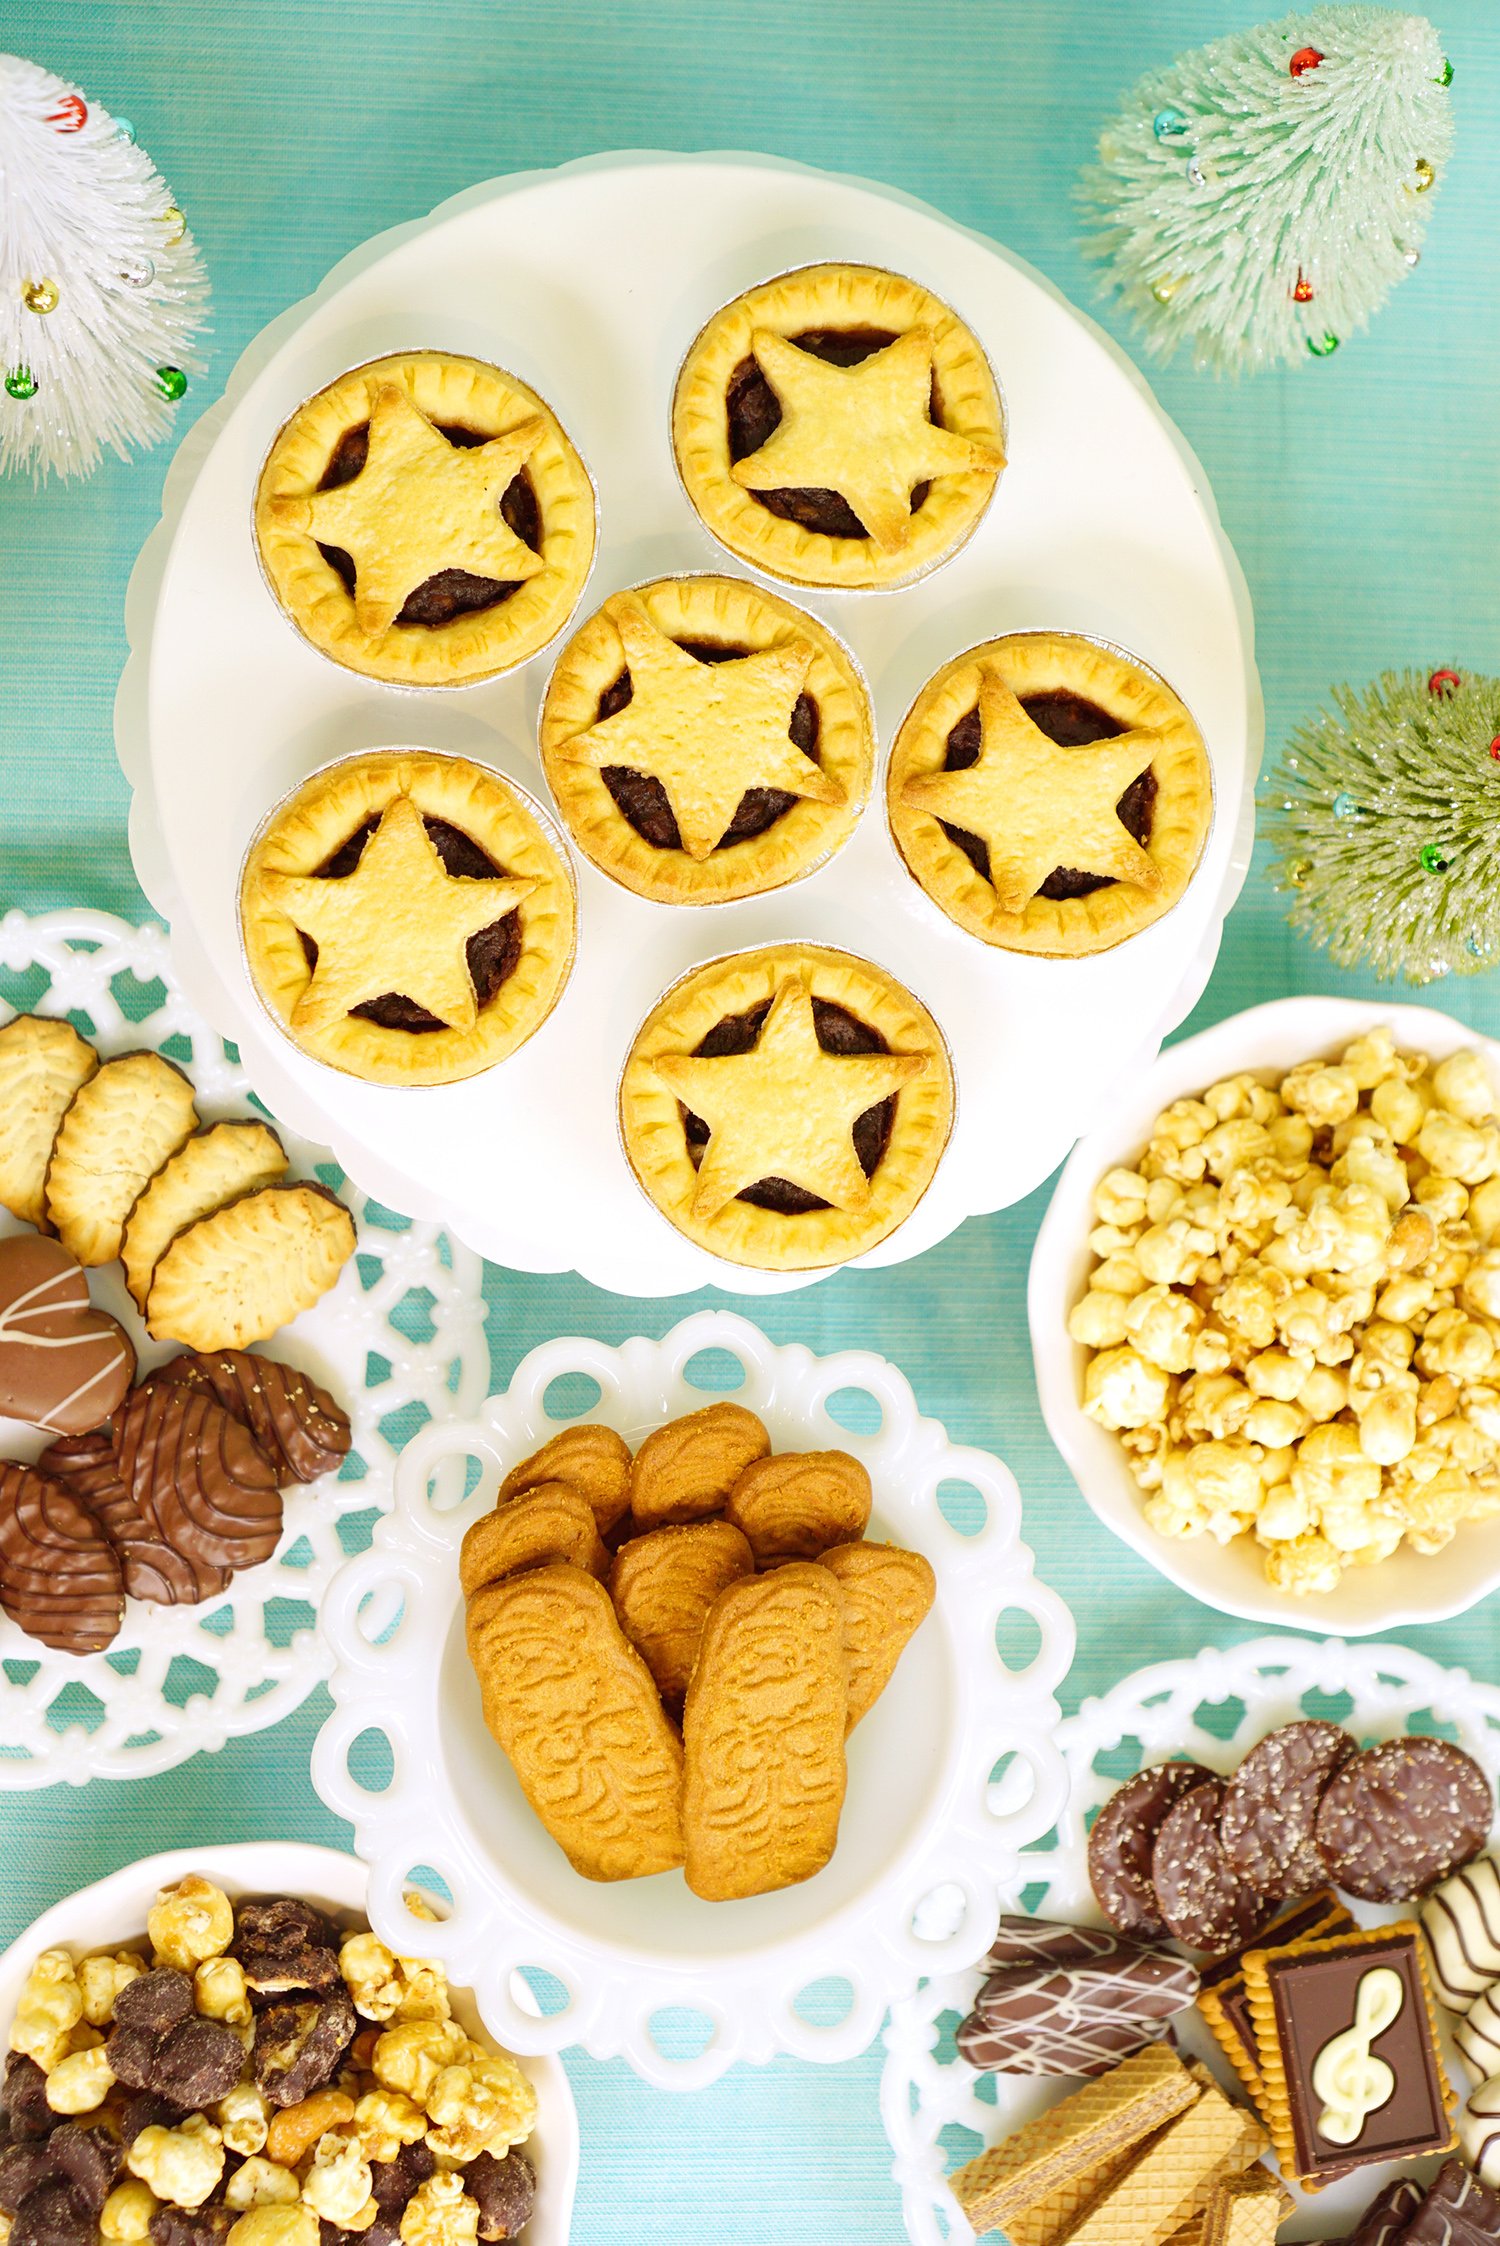 star mince pies and other various snacks 